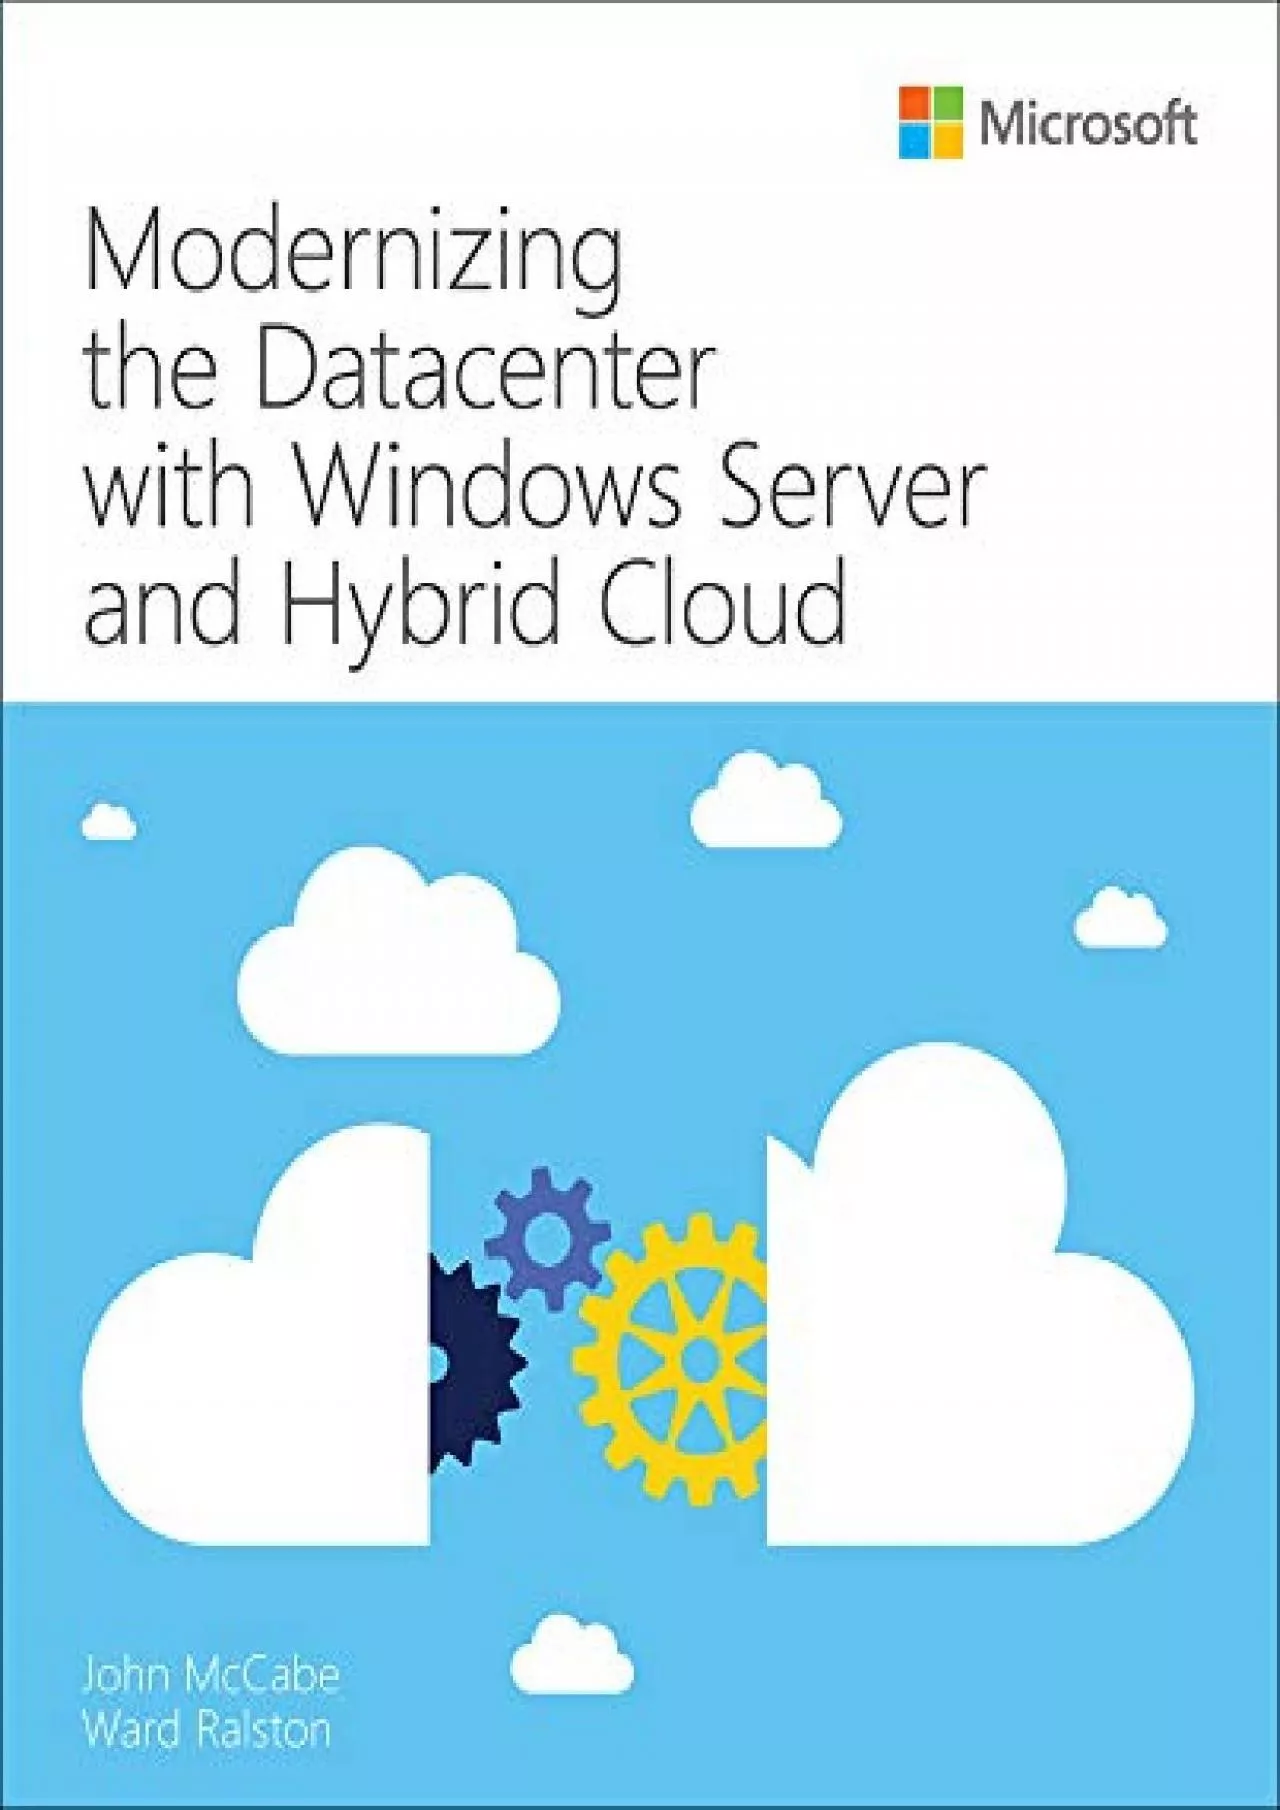 Modernizing the Datacenter with Windows Server and Hybrid Cloud IT Best Practices - Microsoft